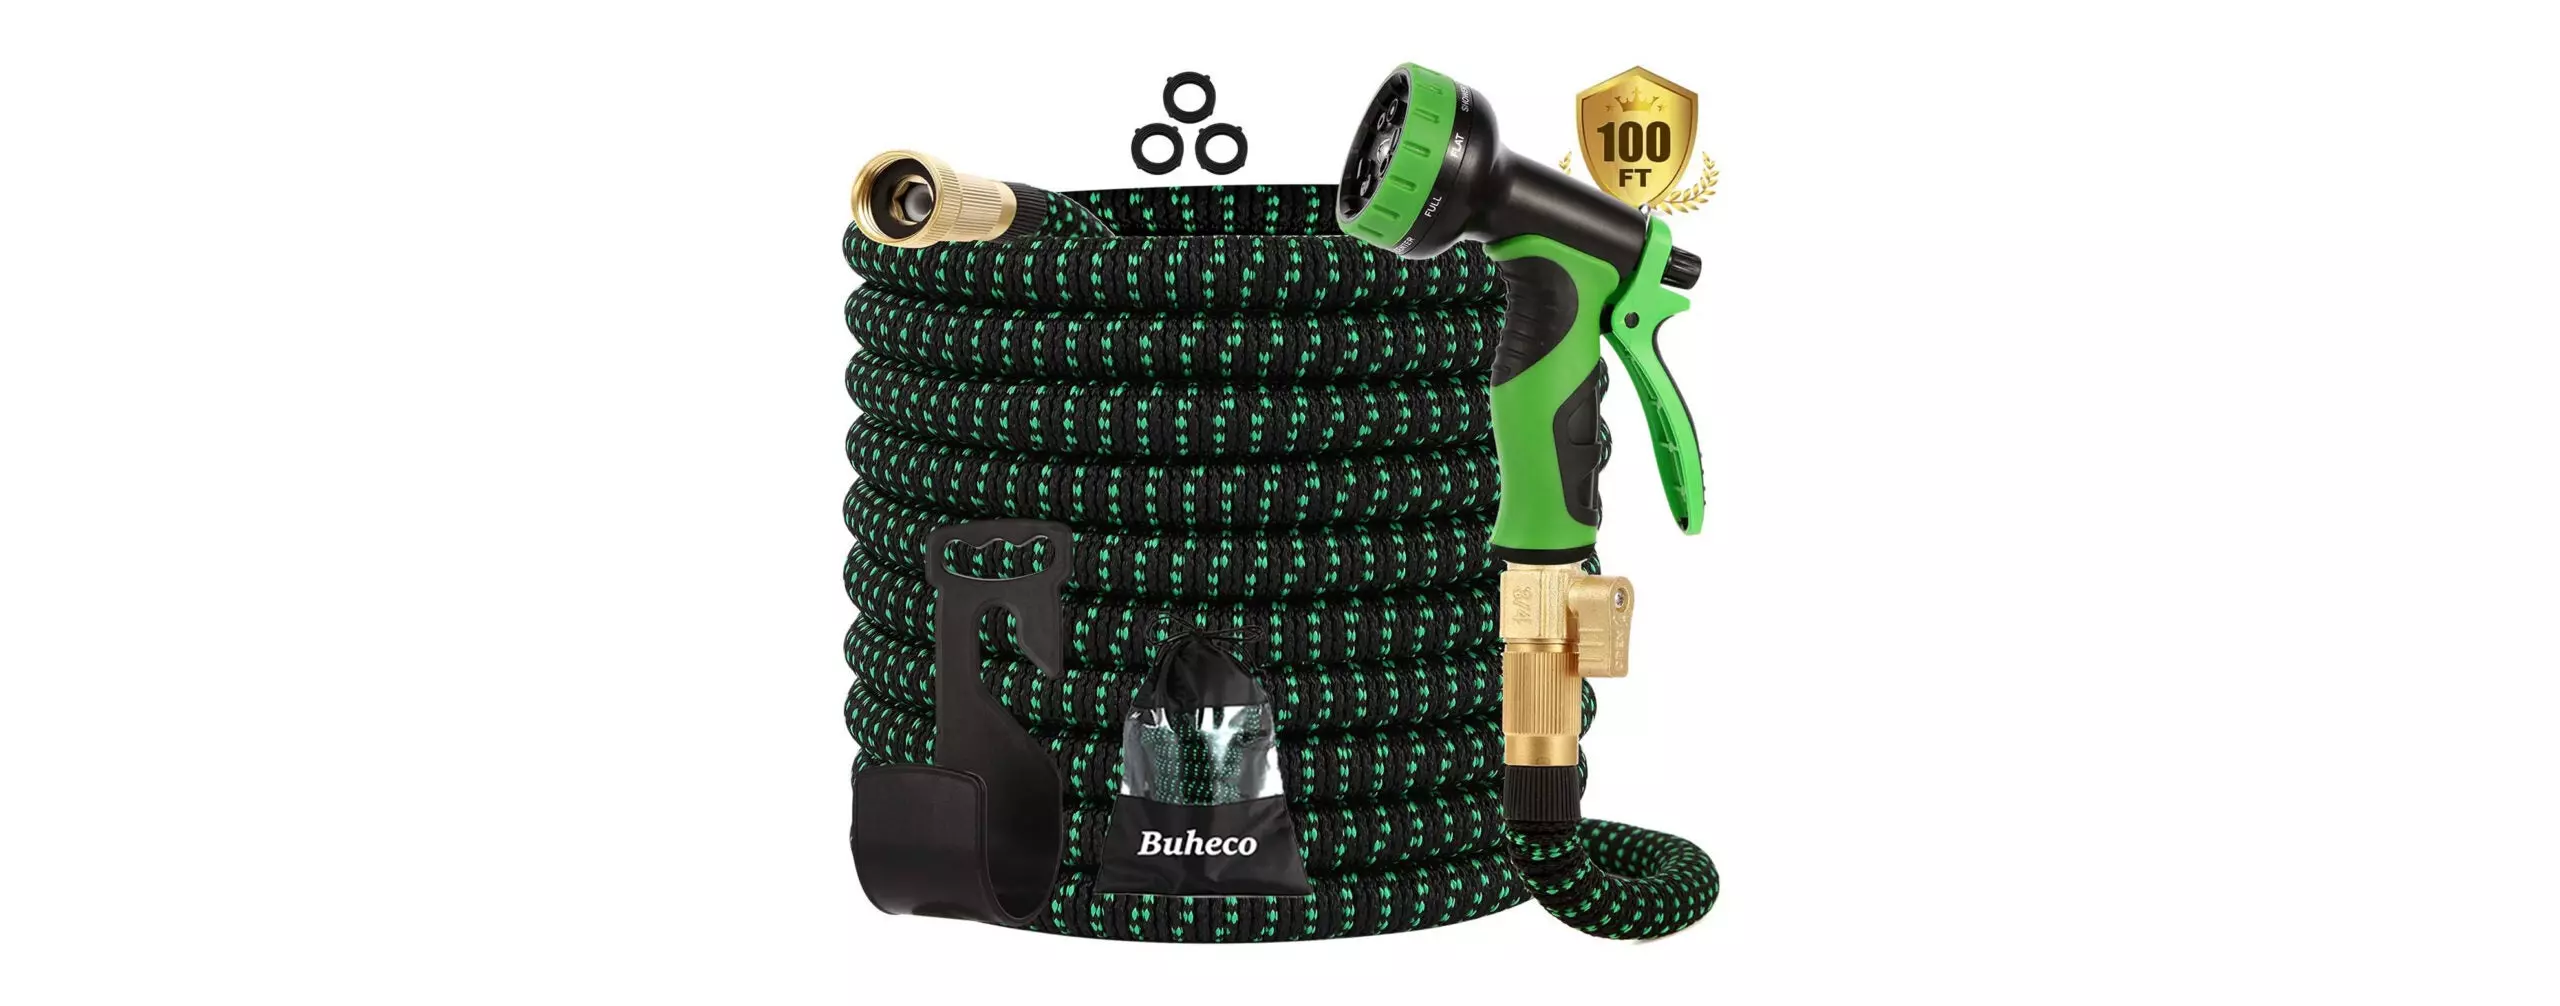 The Best Expandable Hose (Review & Buying Guide) in 2022